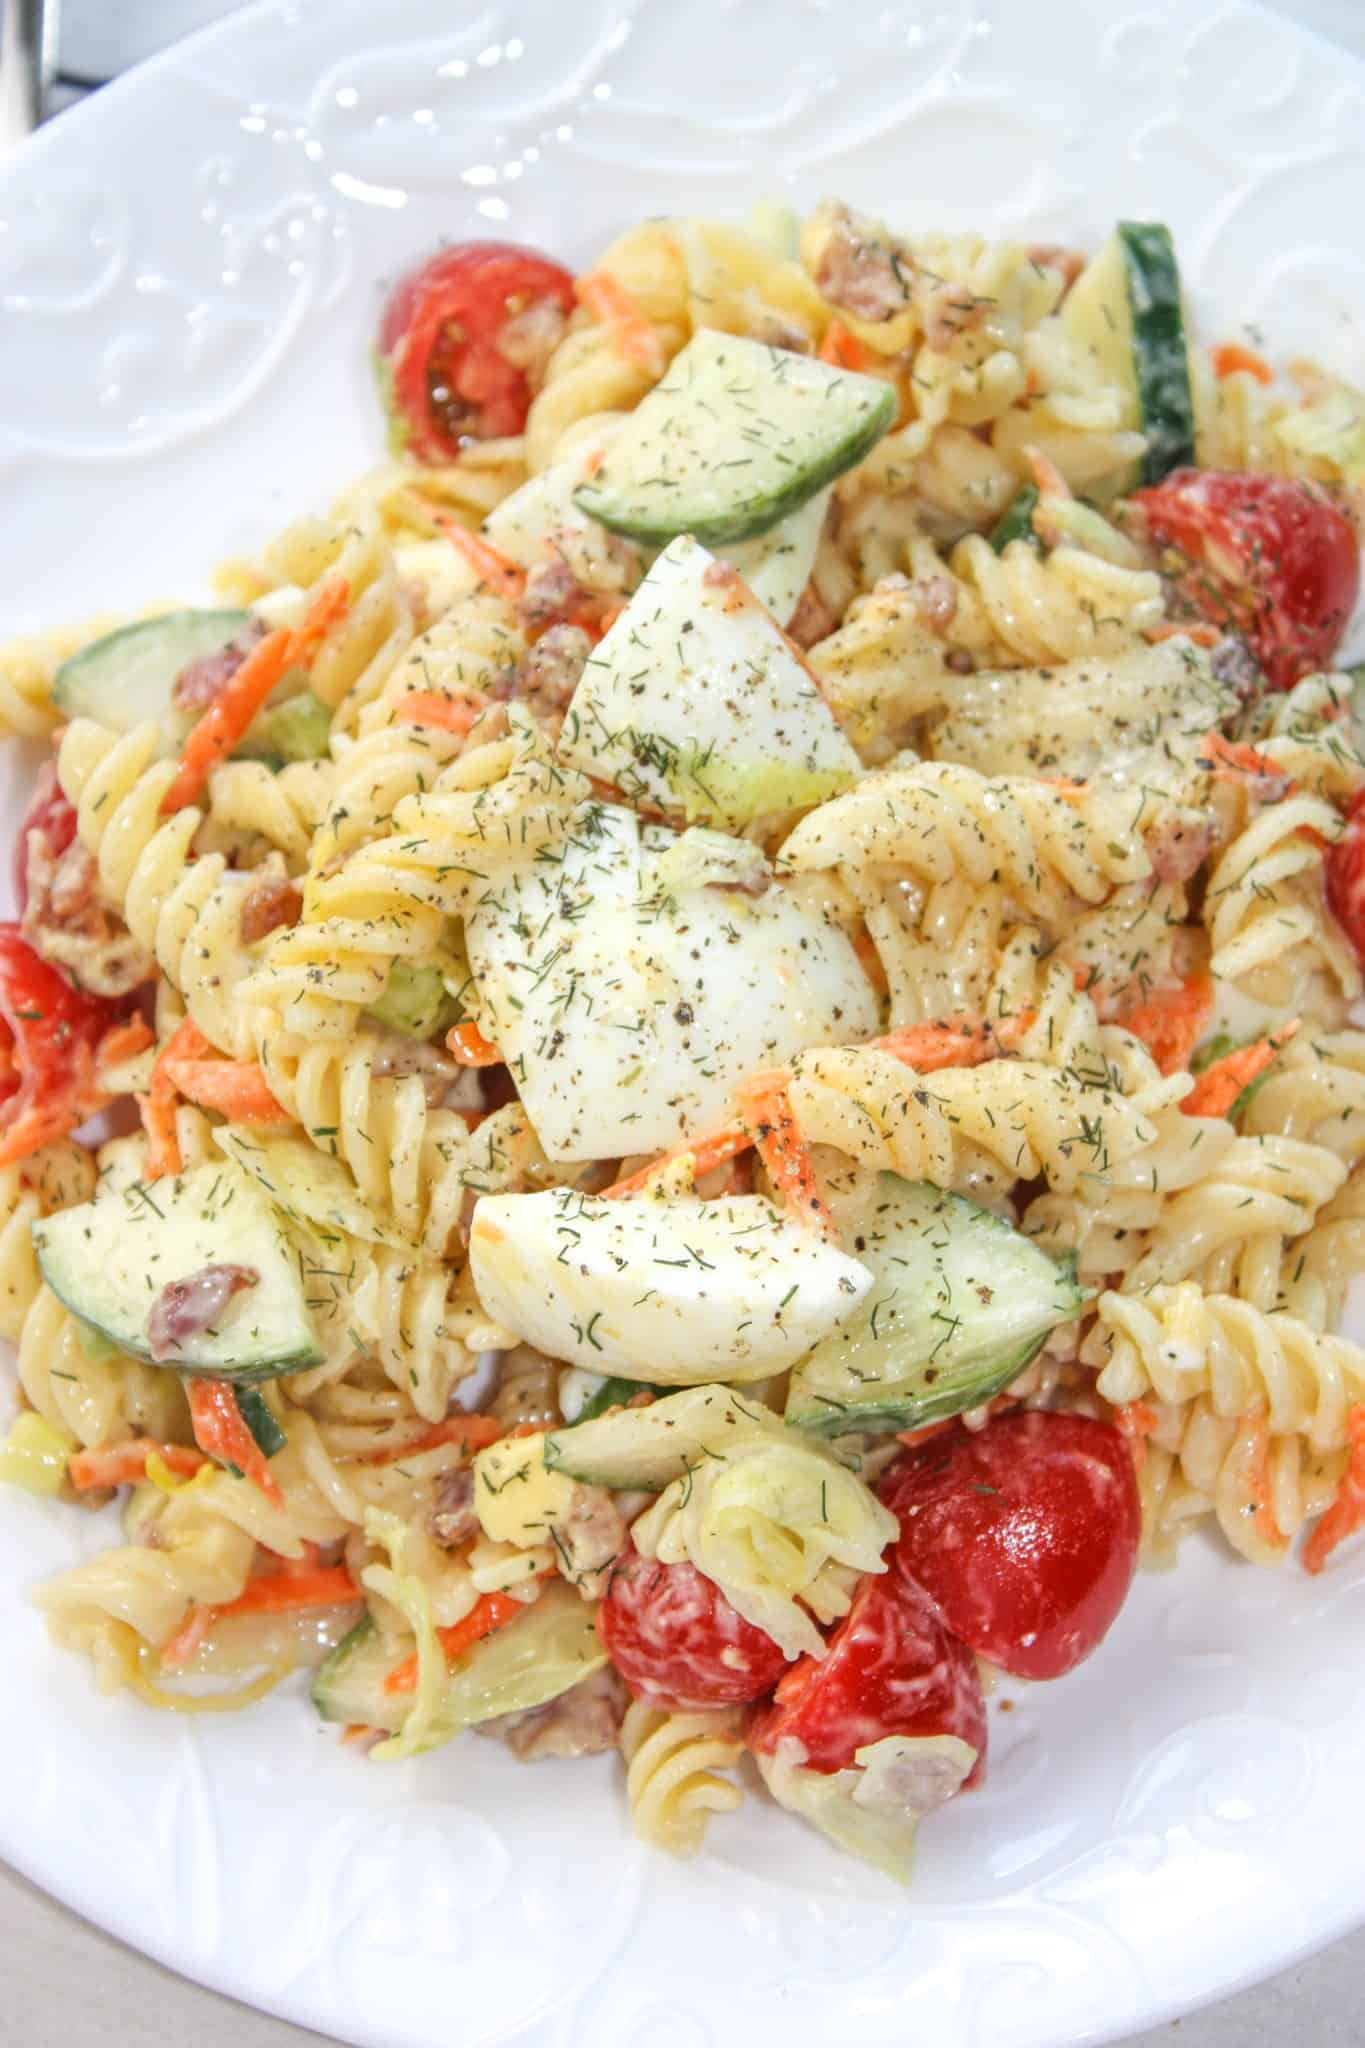 Creamy Lemon Dill Pasta Salad is a flavourful side dish for any occasion.  Loaded with gluten free pasta, vegetables, bacon and dried dill it is a tasty,colourful addition to any meal.